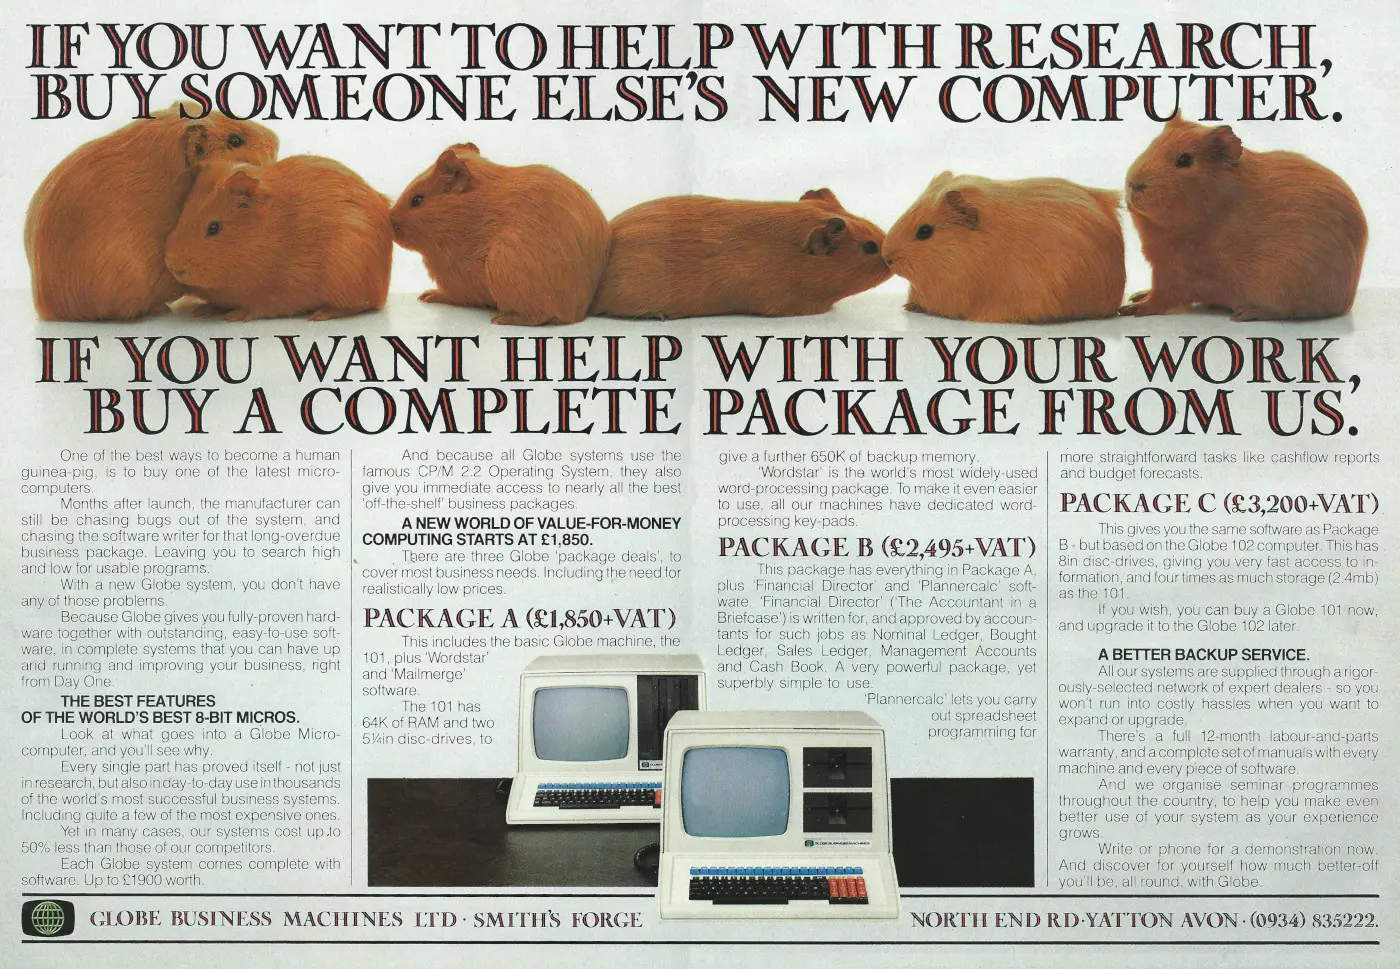 Globe Business Machines Advert: If you want to help with research, buy someone else's computer, from Personal Computer World, April 1983